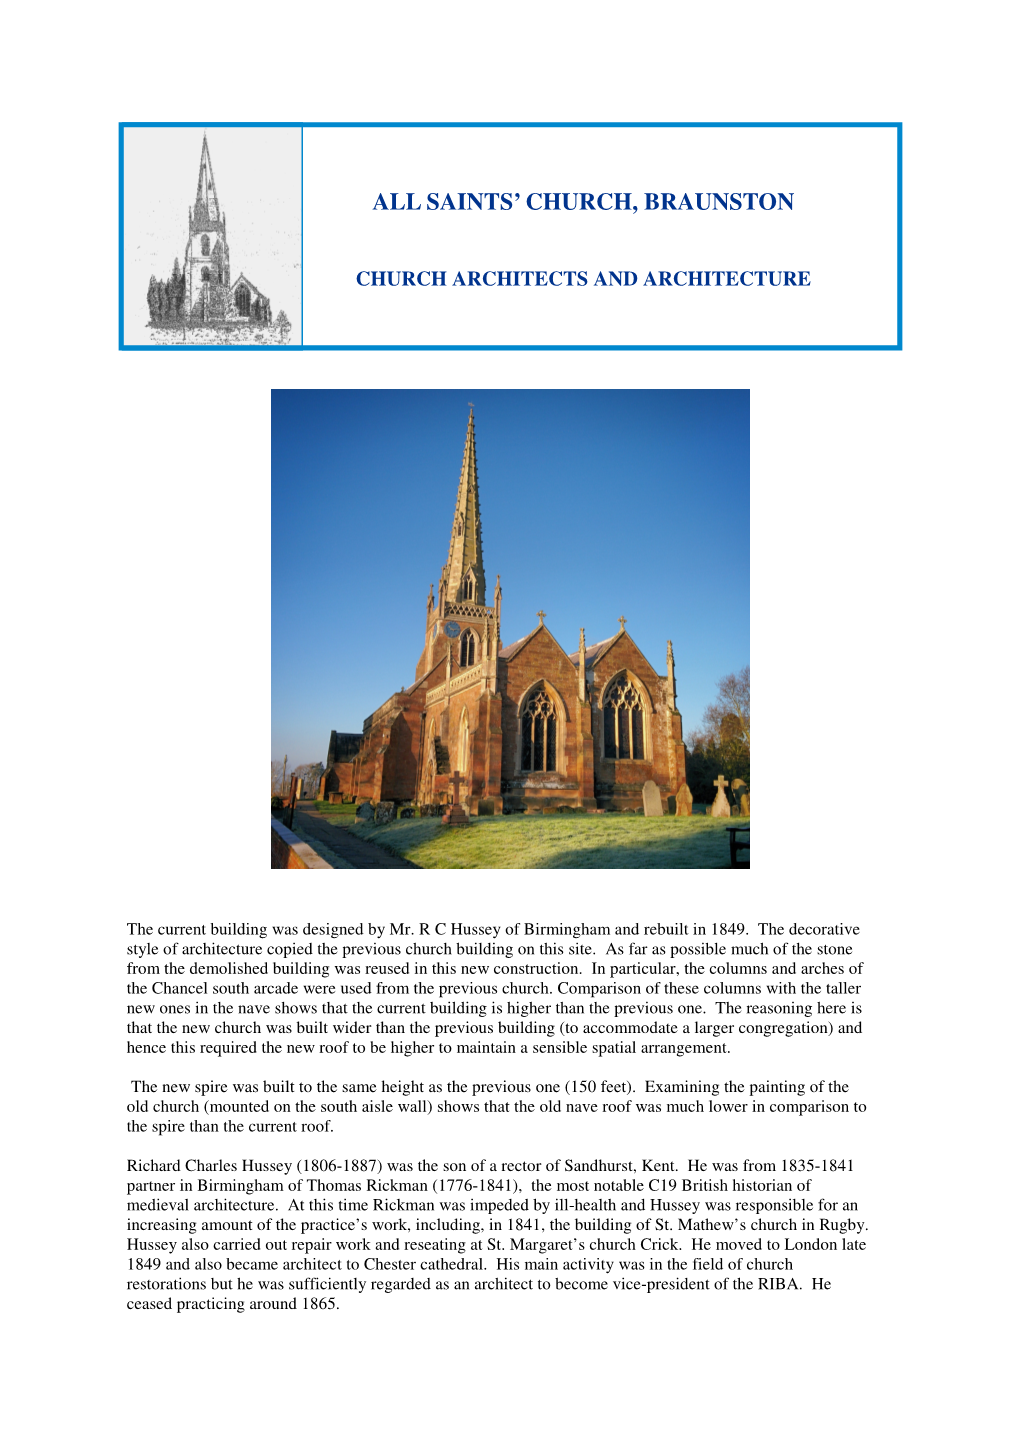 Church Architects and Architecture